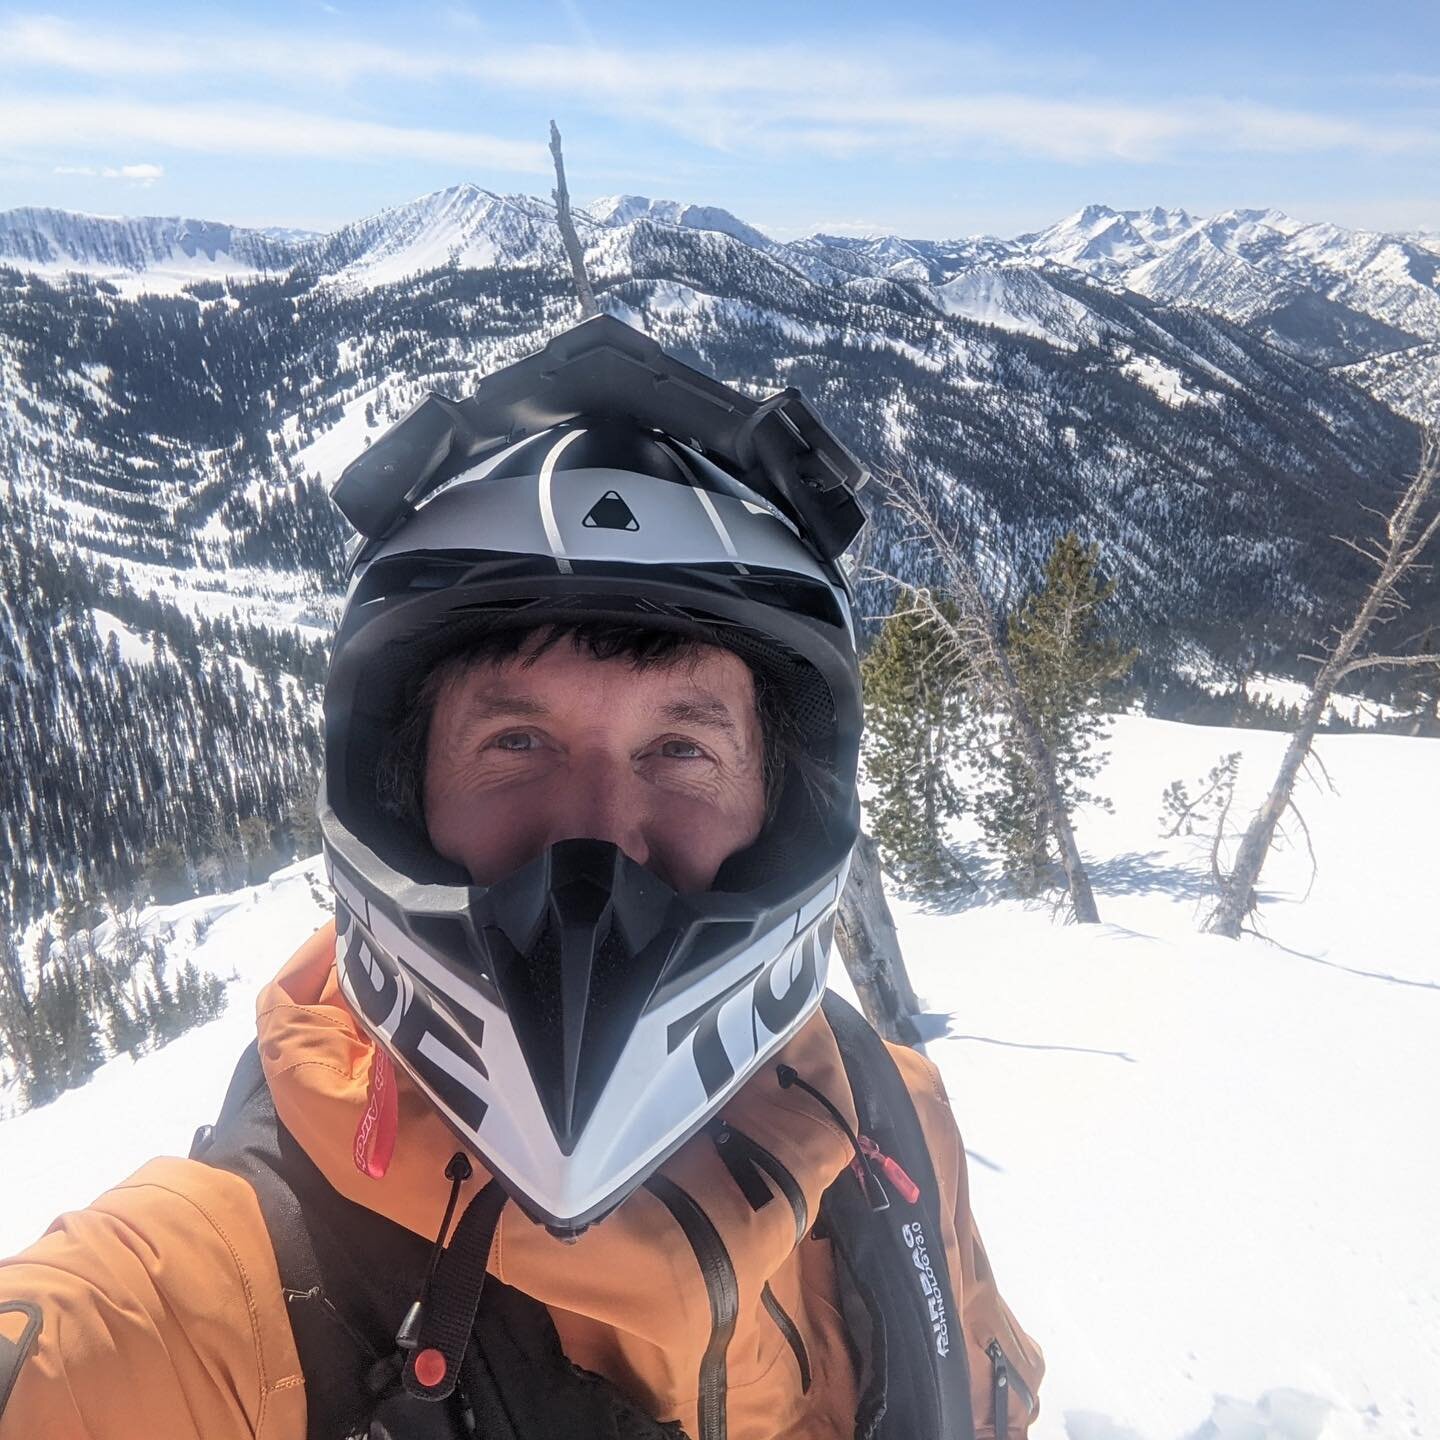 Happy New Year! This one got squeezed out a &lsquo;lil early&hellip;.In Episode 6.10, I sit down with Travis Feist.  Travis is a pro observer for the Sierra Avalanche Center, longtime avalanche educator, ski guide, and former ski patroller.  He split